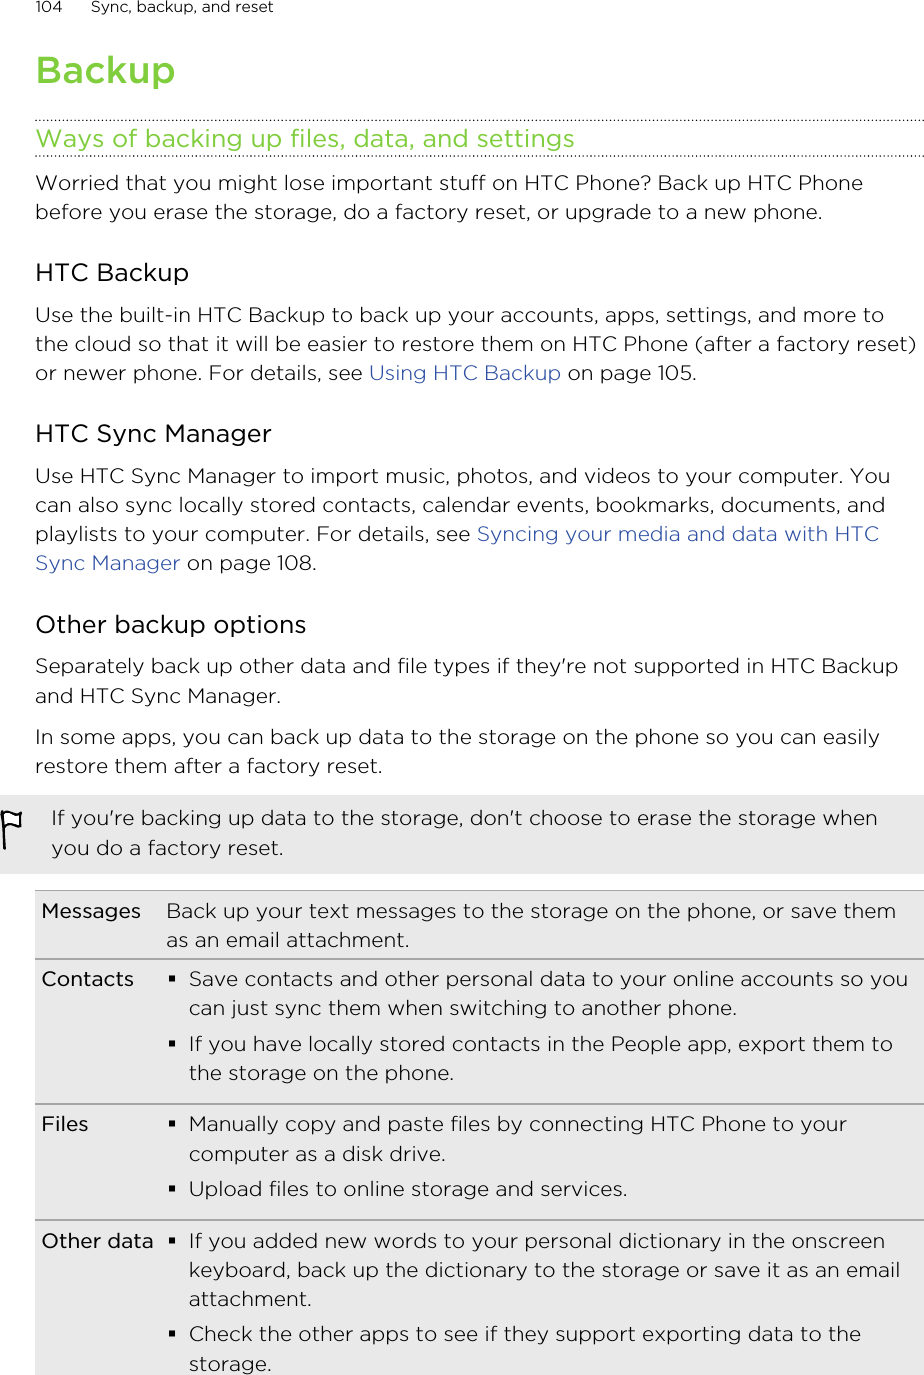 BackupWays of backing up files, data, and settingsWorried that you might lose important stuff on HTC Phone? Back up HTC Phonebefore you erase the storage, do a factory reset, or upgrade to a new phone.HTC BackupUse the built-in HTC Backup to back up your accounts, apps, settings, and more tothe cloud so that it will be easier to restore them on HTC Phone (after a factory reset)or newer phone. For details, see Using HTC Backup on page 105.HTC Sync ManagerUse HTC Sync Manager to import music, photos, and videos to your computer. Youcan also sync locally stored contacts, calendar events, bookmarks, documents, andplaylists to your computer. For details, see Syncing your media and data with HTCSync Manager on page 108.Other backup optionsSeparately back up other data and file types if they&apos;re not supported in HTC Backupand HTC Sync Manager.In some apps, you can back up data to the storage on the phone so you can easilyrestore them after a factory reset.If you&apos;re backing up data to the storage, don&apos;t choose to erase the storage whenyou do a factory reset.Messages Back up your text messages to the storage on the phone, or save themas an email attachment.Contacts §Save contacts and other personal data to your online accounts so youcan just sync them when switching to another phone.§If you have locally stored contacts in the People app, export them tothe storage on the phone.Files §Manually copy and paste files by connecting HTC Phone to yourcomputer as a disk drive.§Upload files to online storage and services.Other data §If you added new words to your personal dictionary in the onscreenkeyboard, back up the dictionary to the storage or save it as an emailattachment.§Check the other apps to see if they support exporting data to thestorage.104 Sync, backup, and reset